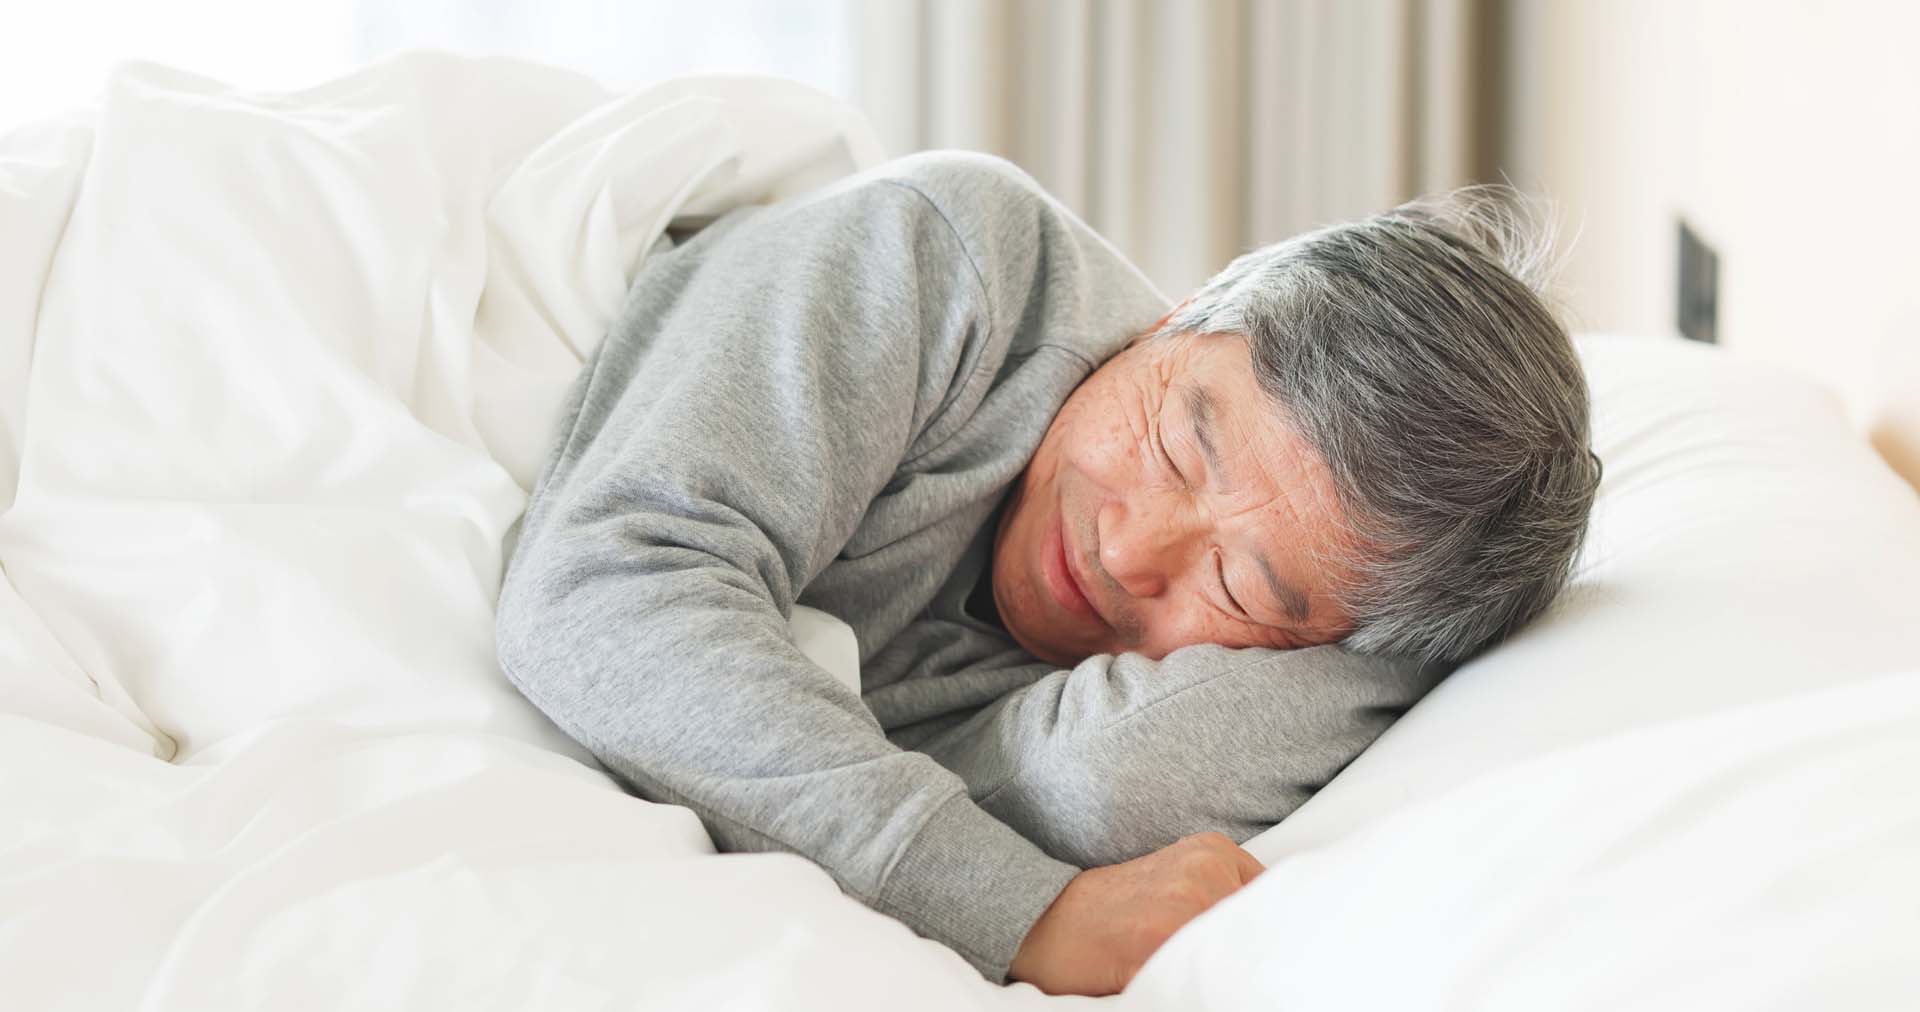 Man asleep on his side in bed